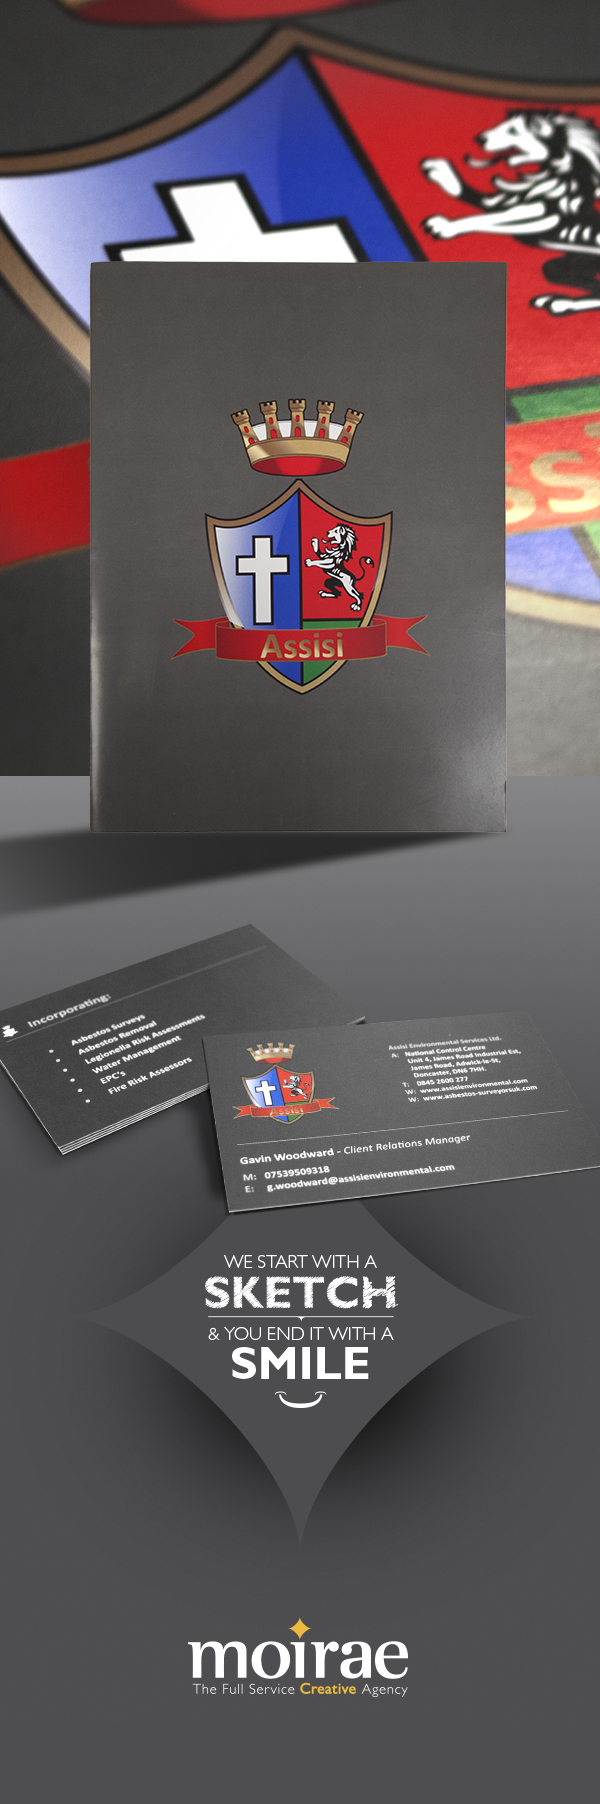 folder design inserts Printing design Business Cards print concept creative shadow effects business